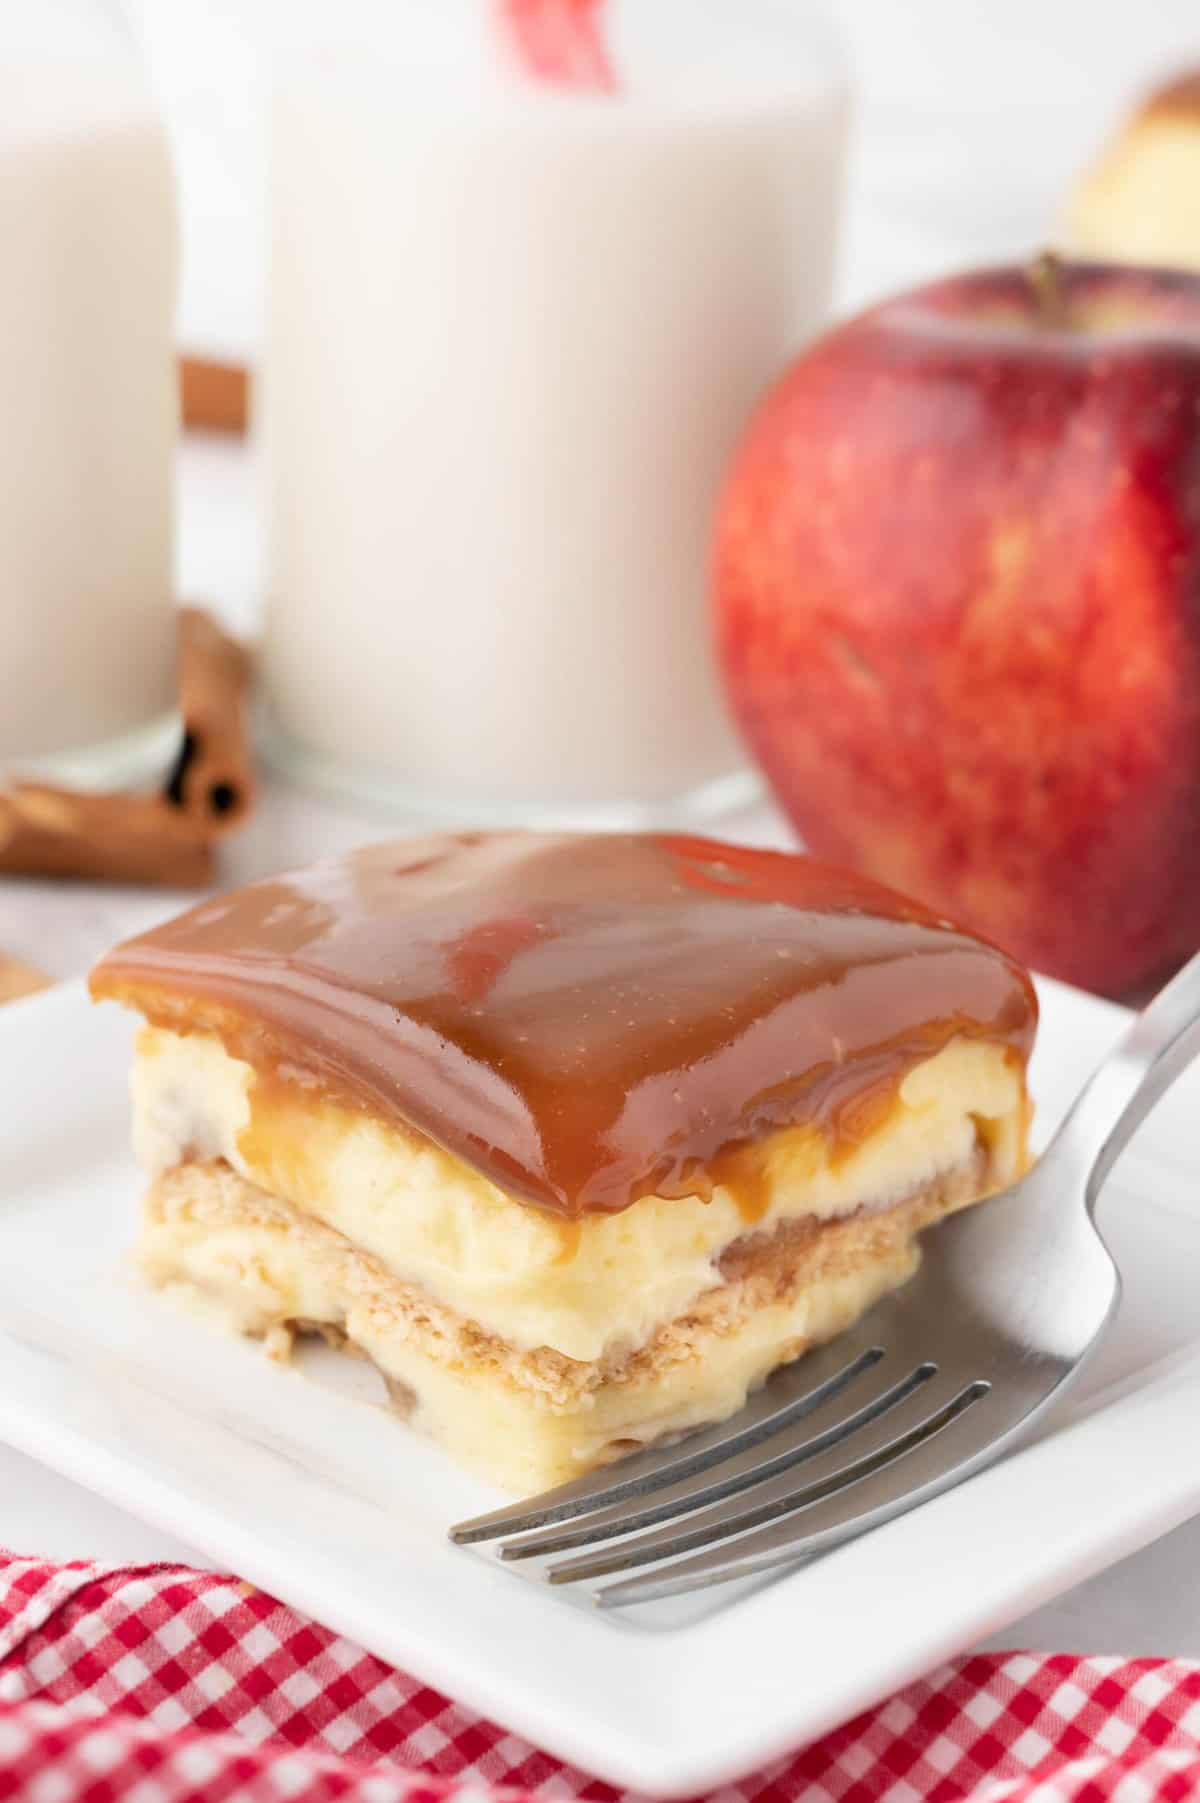 A slice of caramel apple eclair cake on a white plate with a red gingham napkin and a glass of milk next to an apple behind it.